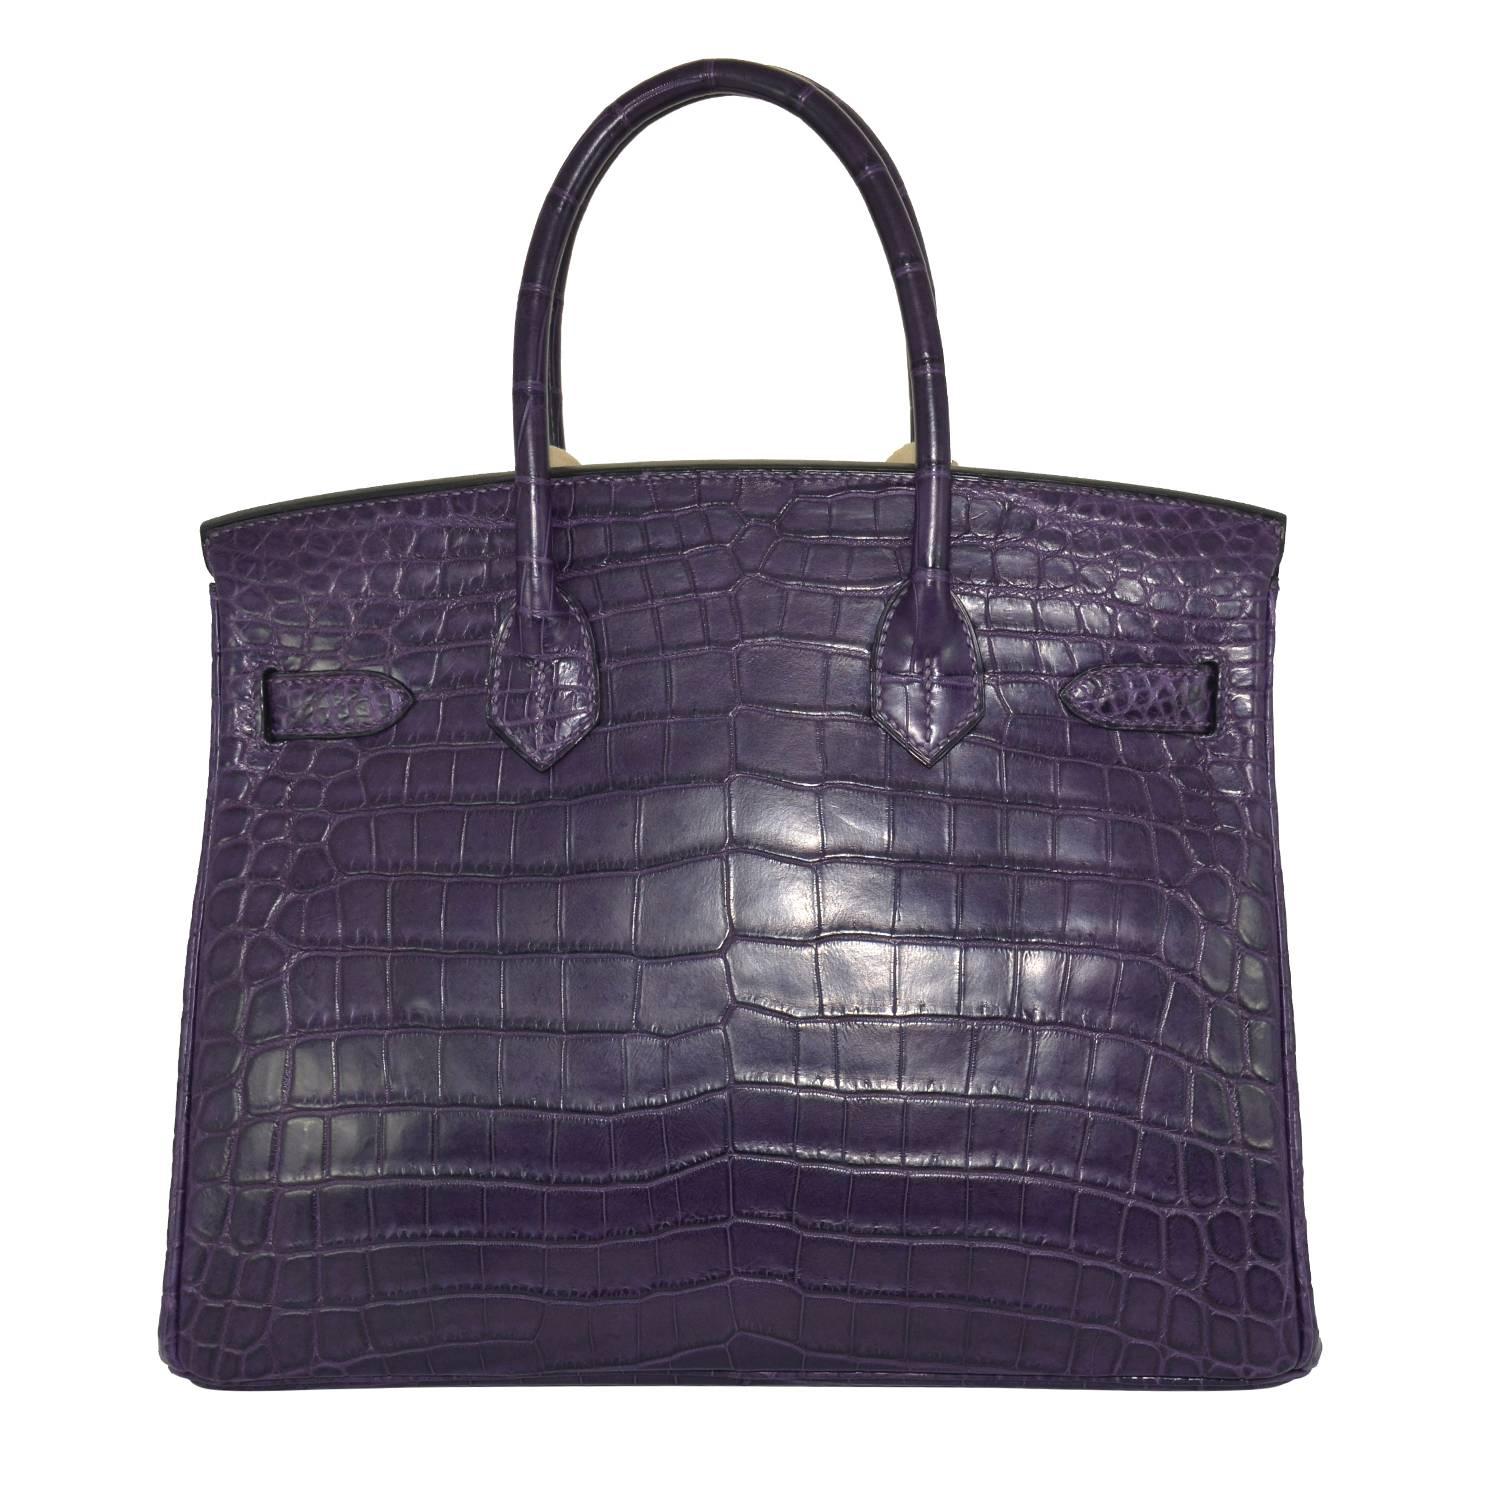 Hermes birkin 30 Crocodile Amethyst Gold Hardware 2016.

Pre-owned and never used.

Bought it in Hermes store.

Model: Birkin

Dimensions: 30cm width x 22cm height x 16cm length.

Color: Amethyst 

Details:
*Protective felt removed for